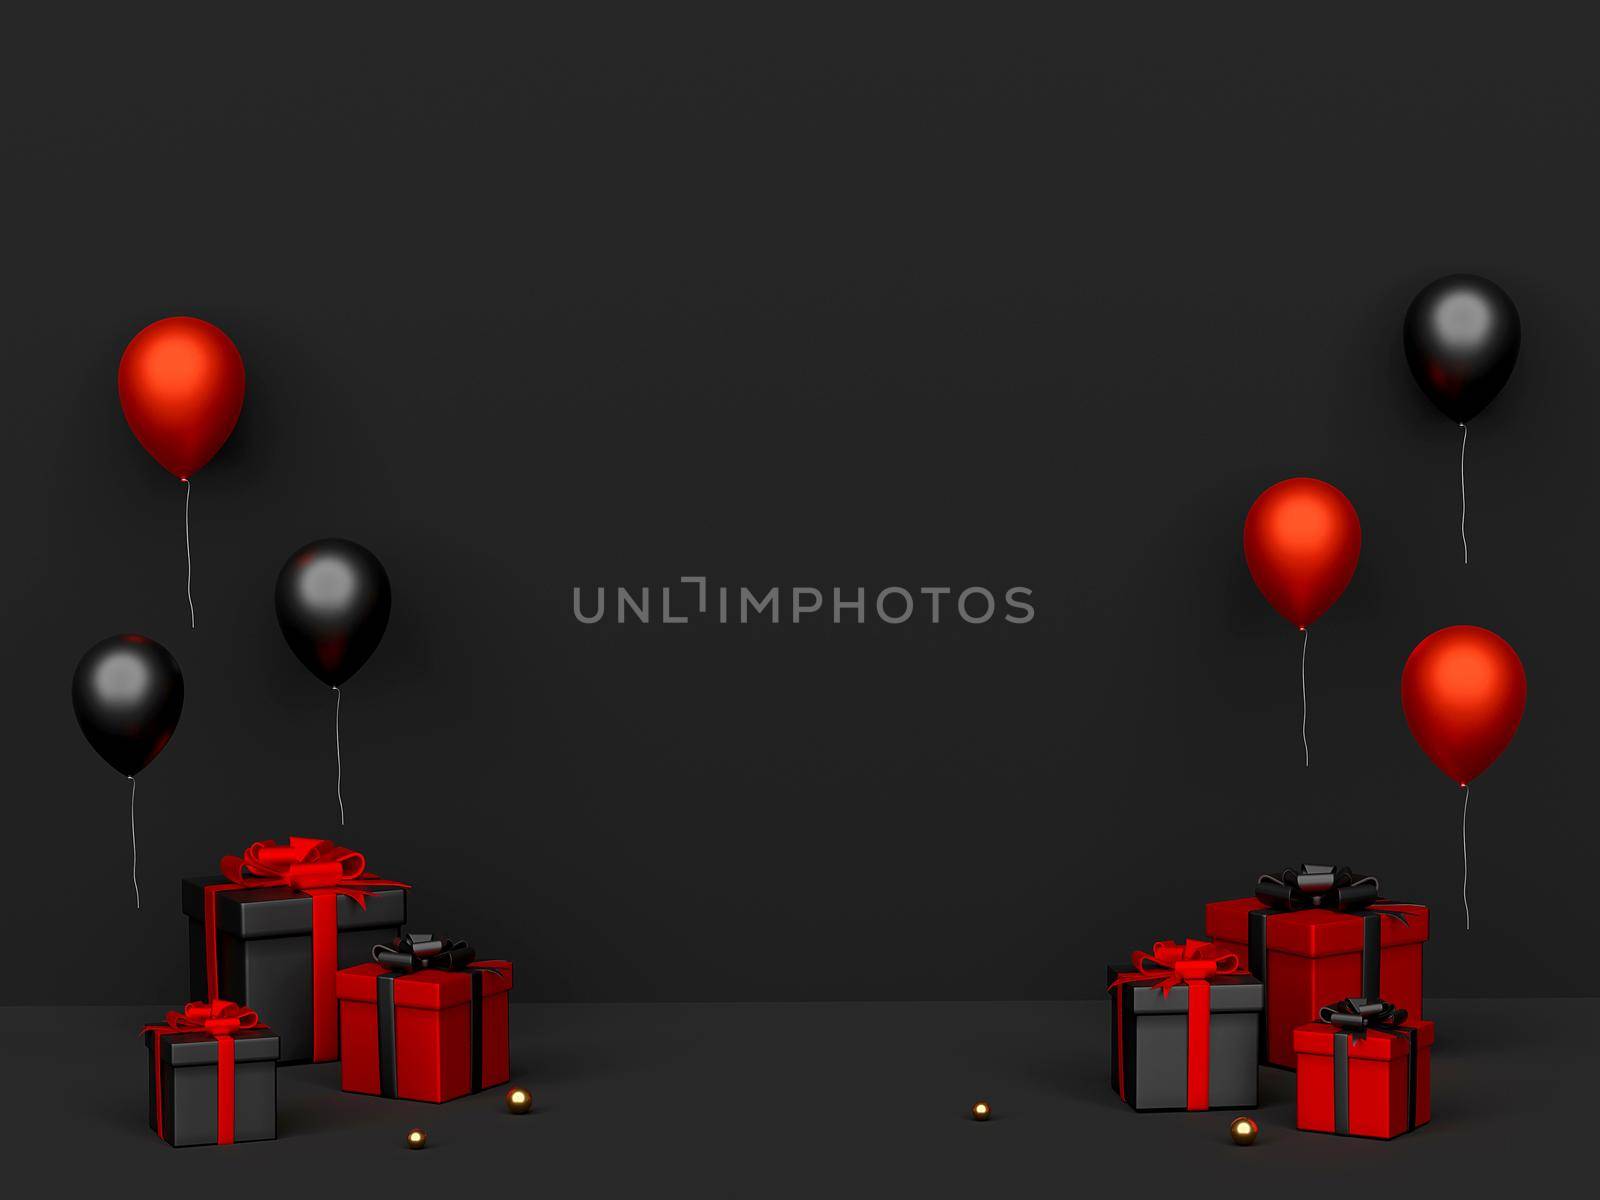 Black friday gifts and balloon with black space, 3d rendering